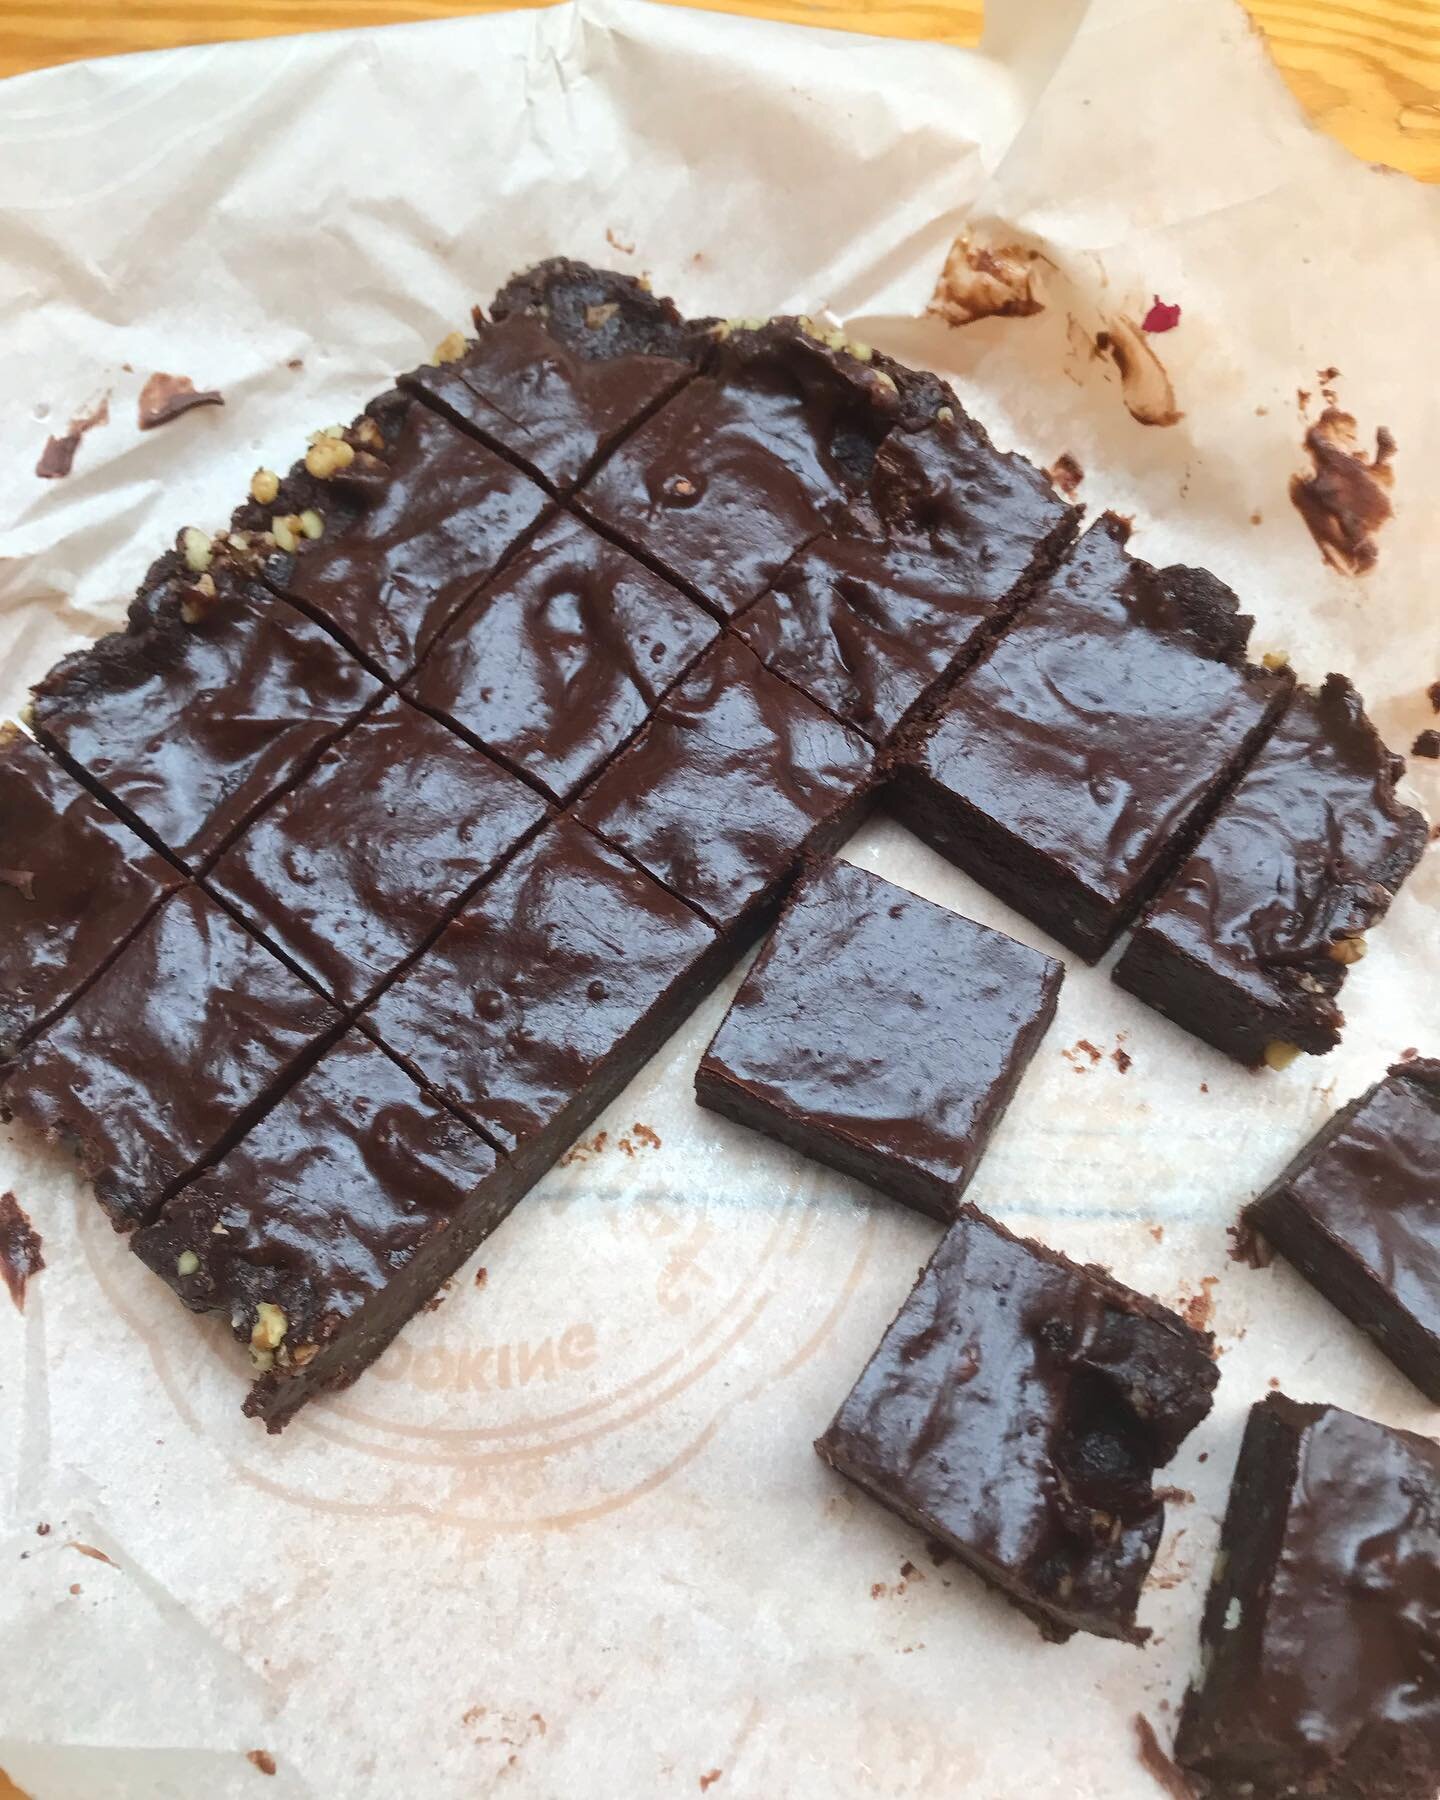 No-bake Vegan Brownies 🤎

2&frac12; cups loosely packed pitted dates
1 1/2 cups walnuts
6 tbsp cacao or cocoa powder
1 1/2 tsp pure vanilla extract
2 tsp water
1/4 + 1/8 tsp salt
1/4 cup cacao or cocoa powder
&frac14; cup pure maple syrup
4 tbsp pea